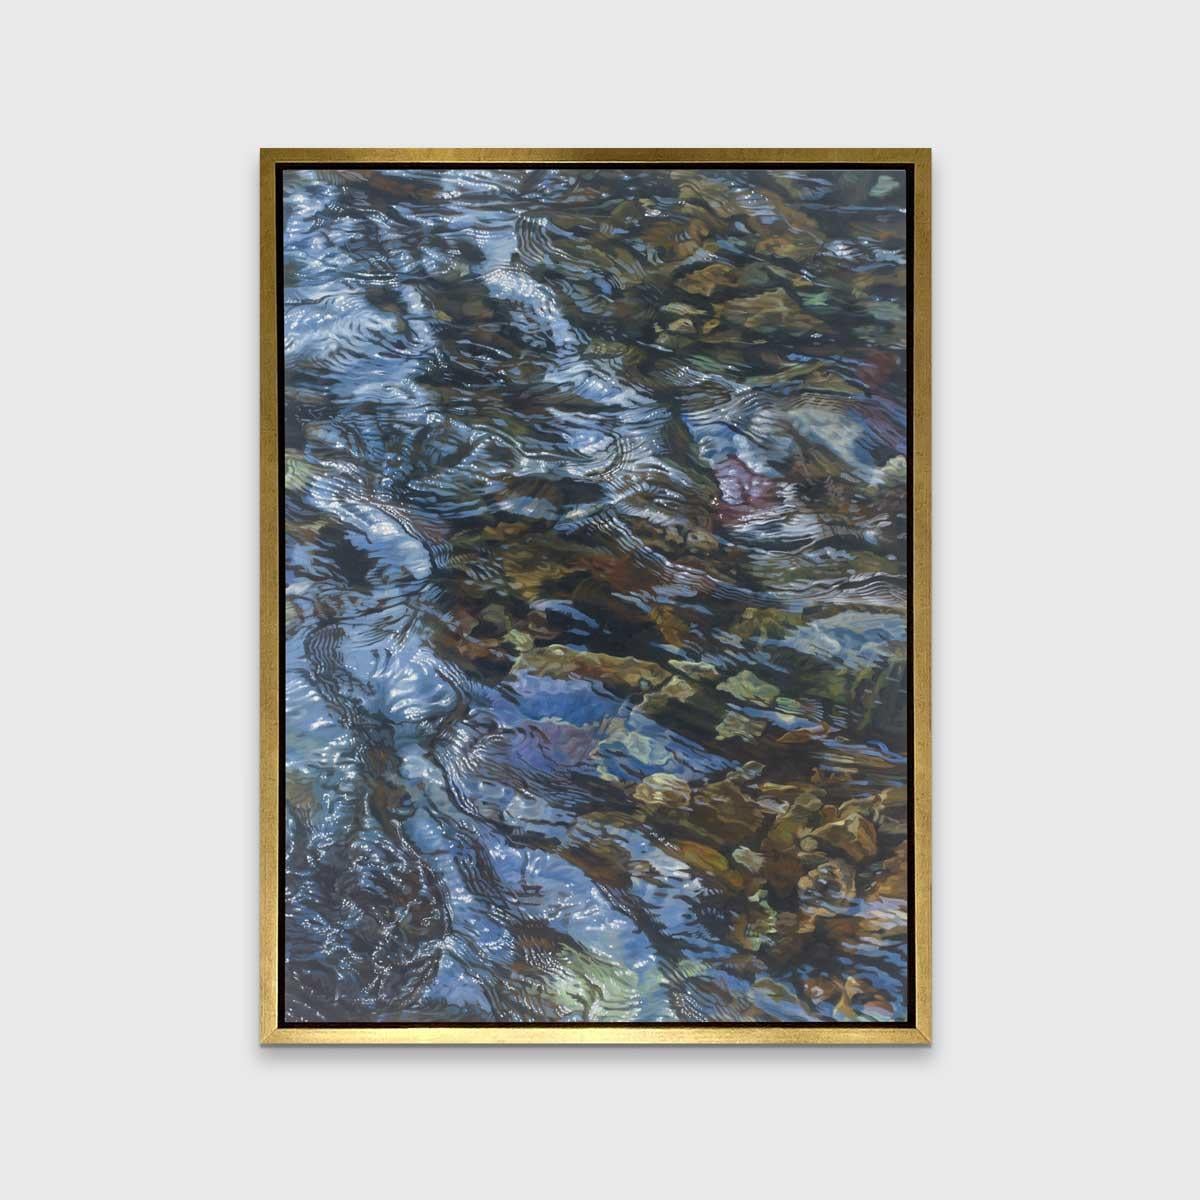 This realistic limited edition print captures a highly detailed, cropped, close-up view of water lightly rippling over rocks. The water reflects light above it to add dimension and depth to the piece. 

This Limited Edition giclee print is an